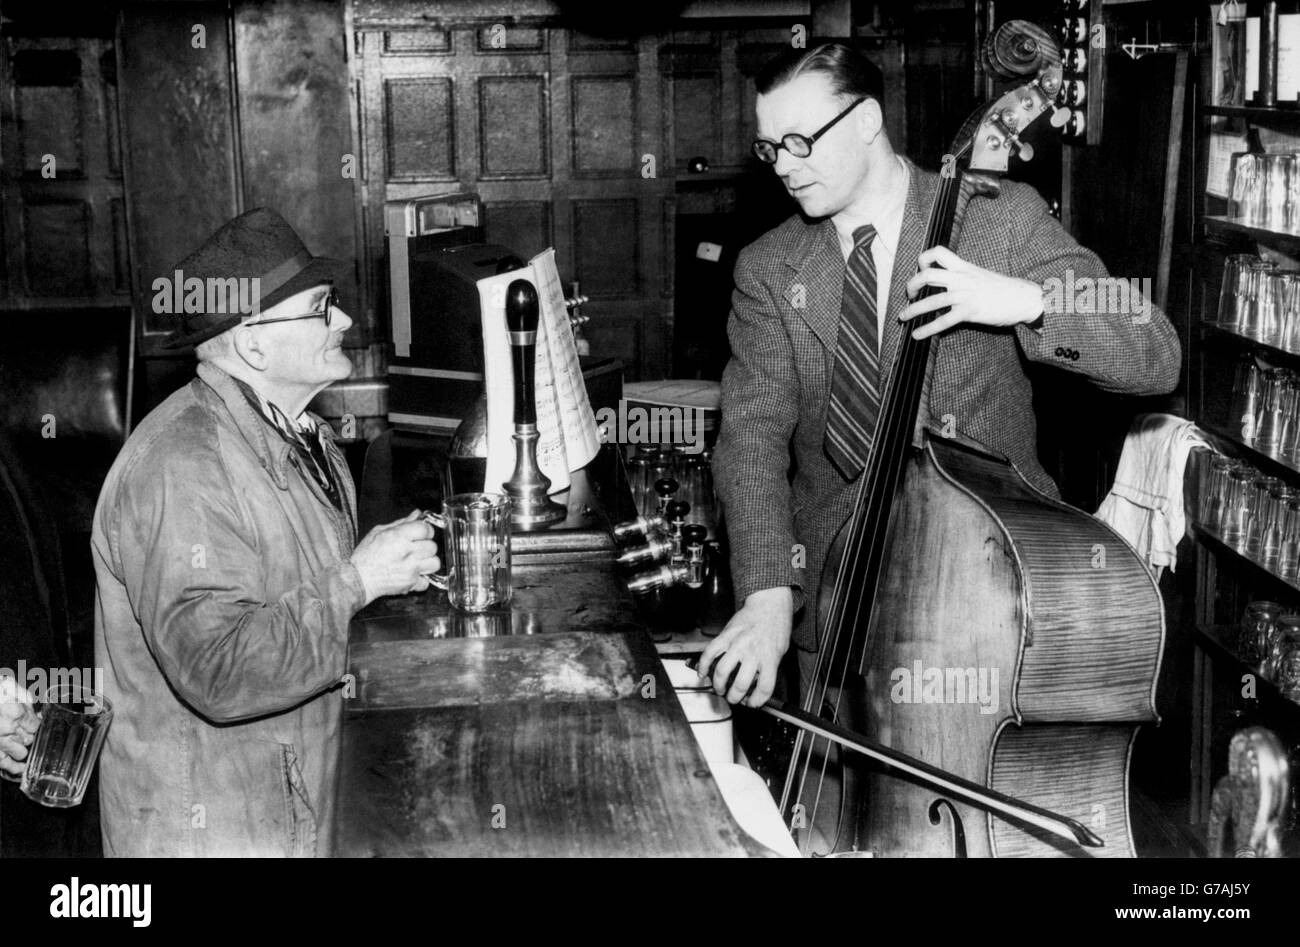 With his score propped against the beer pumps, Victor Cook, landlord of the Park-Lane Tavern, Cradley, near Wolverhampton, practices on his bull fiddle, while a thirsty customer waits with an empty glass. Stock Photo